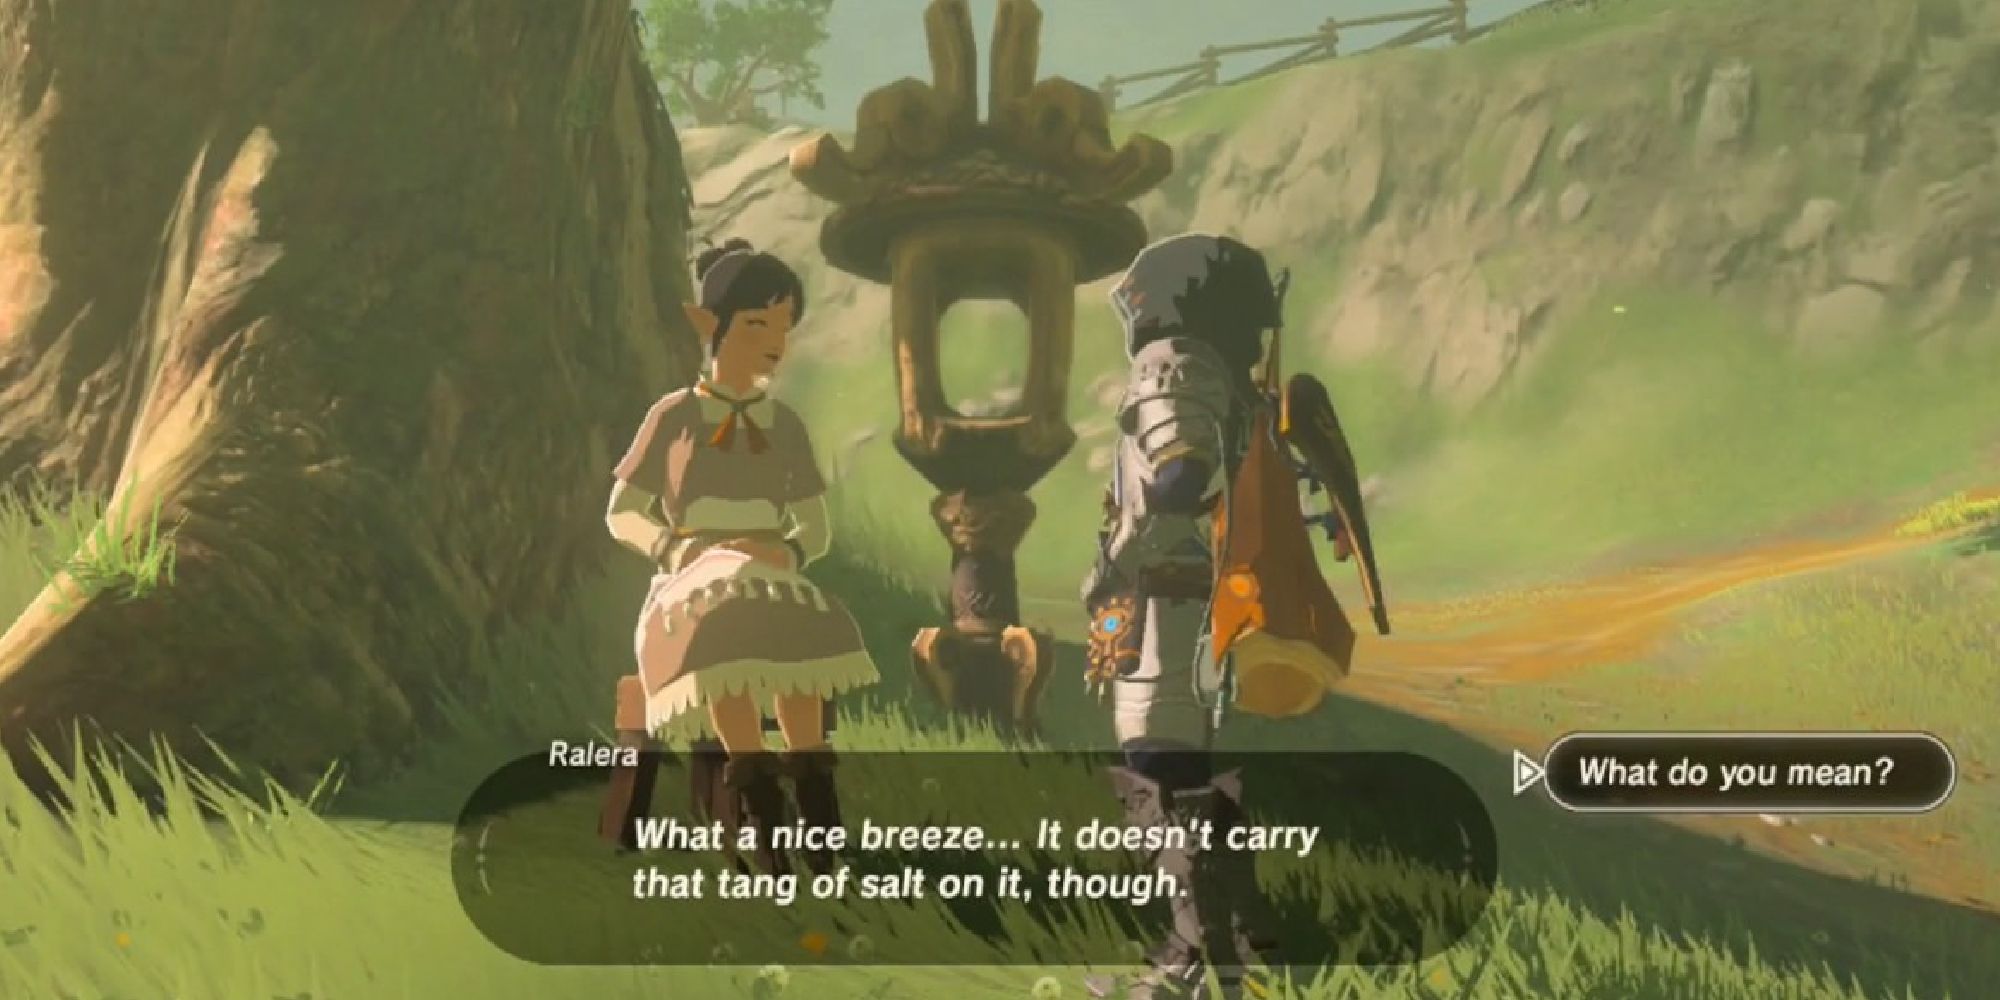 Link talking to Ralera, who sits under a tree near a torch light and comments on the breeze